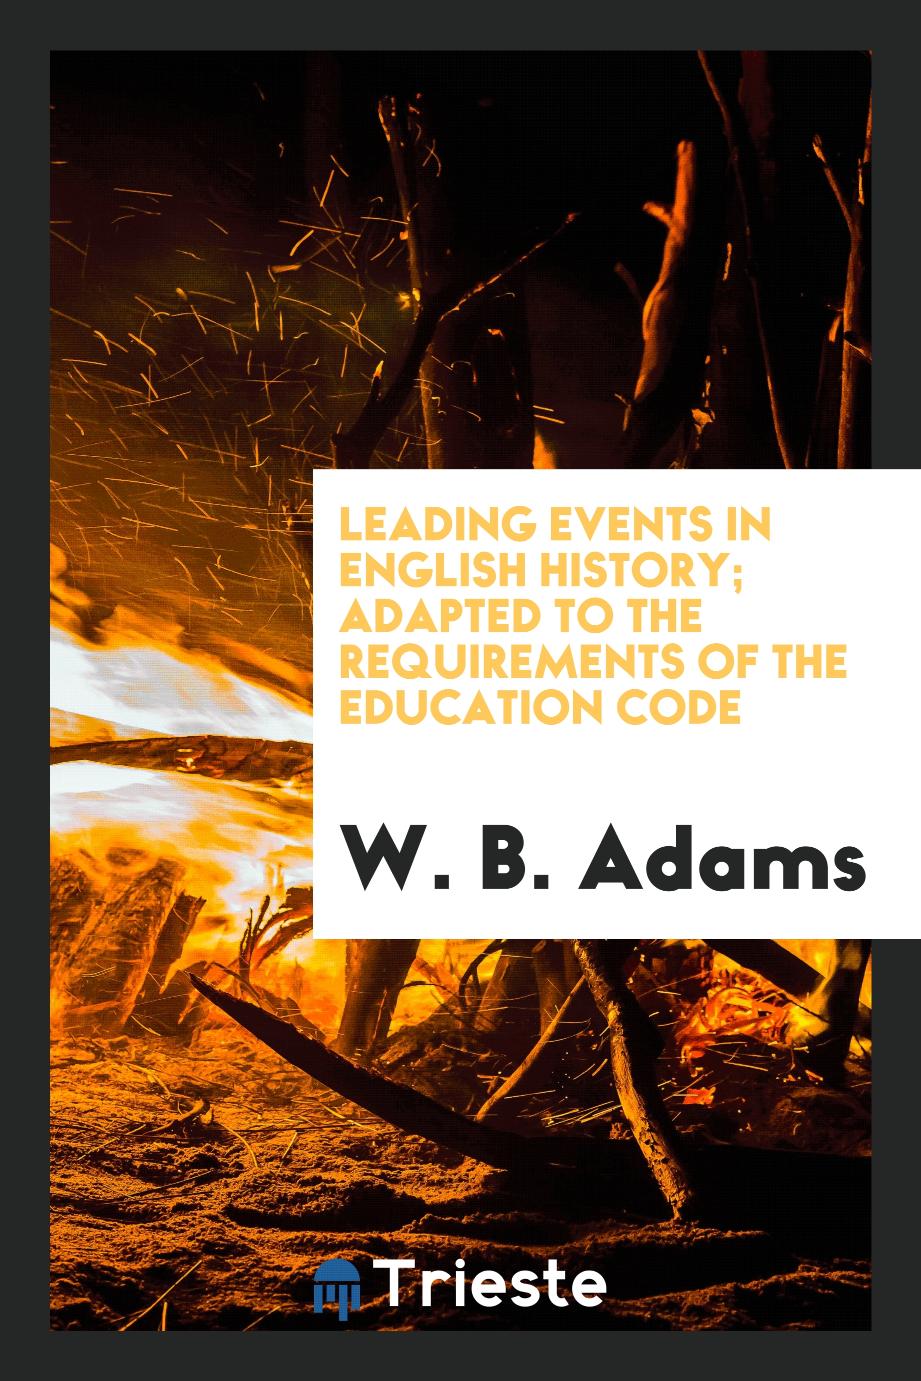 Leading events in English history; adapted to the requirements of the education code